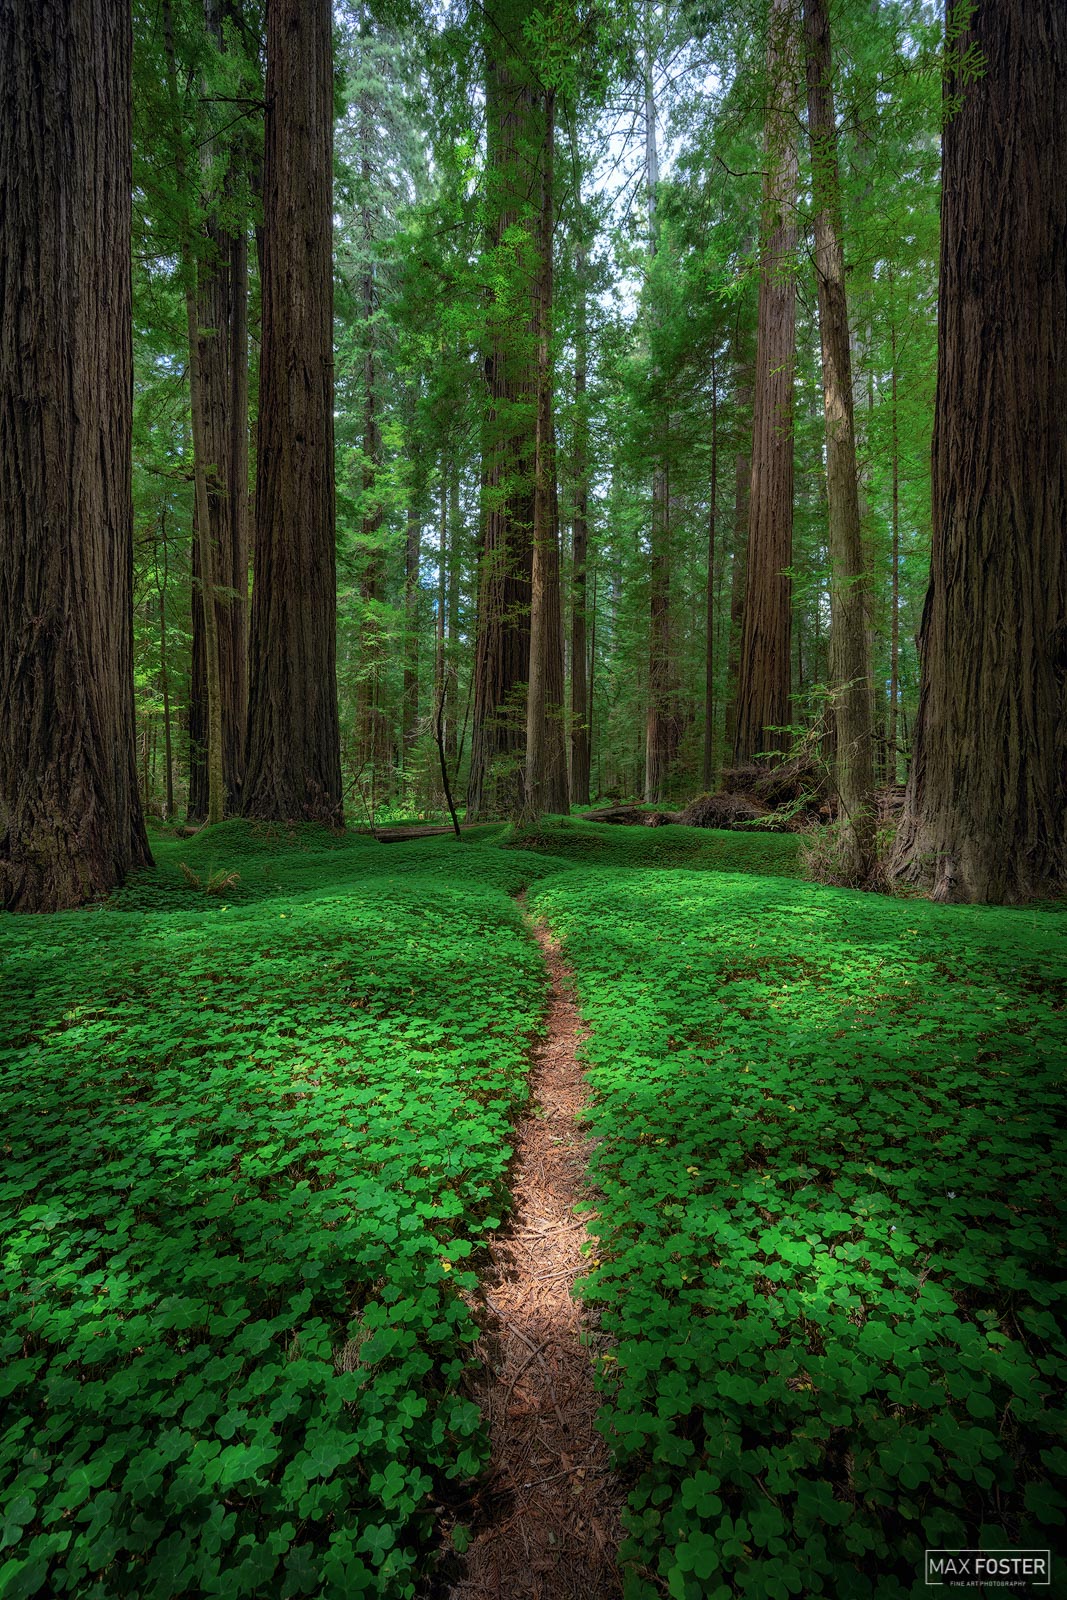 Breathe new life into your home with Hallowed Ground, Max Foster's limited edition photography print of Coast Redwoods in California...